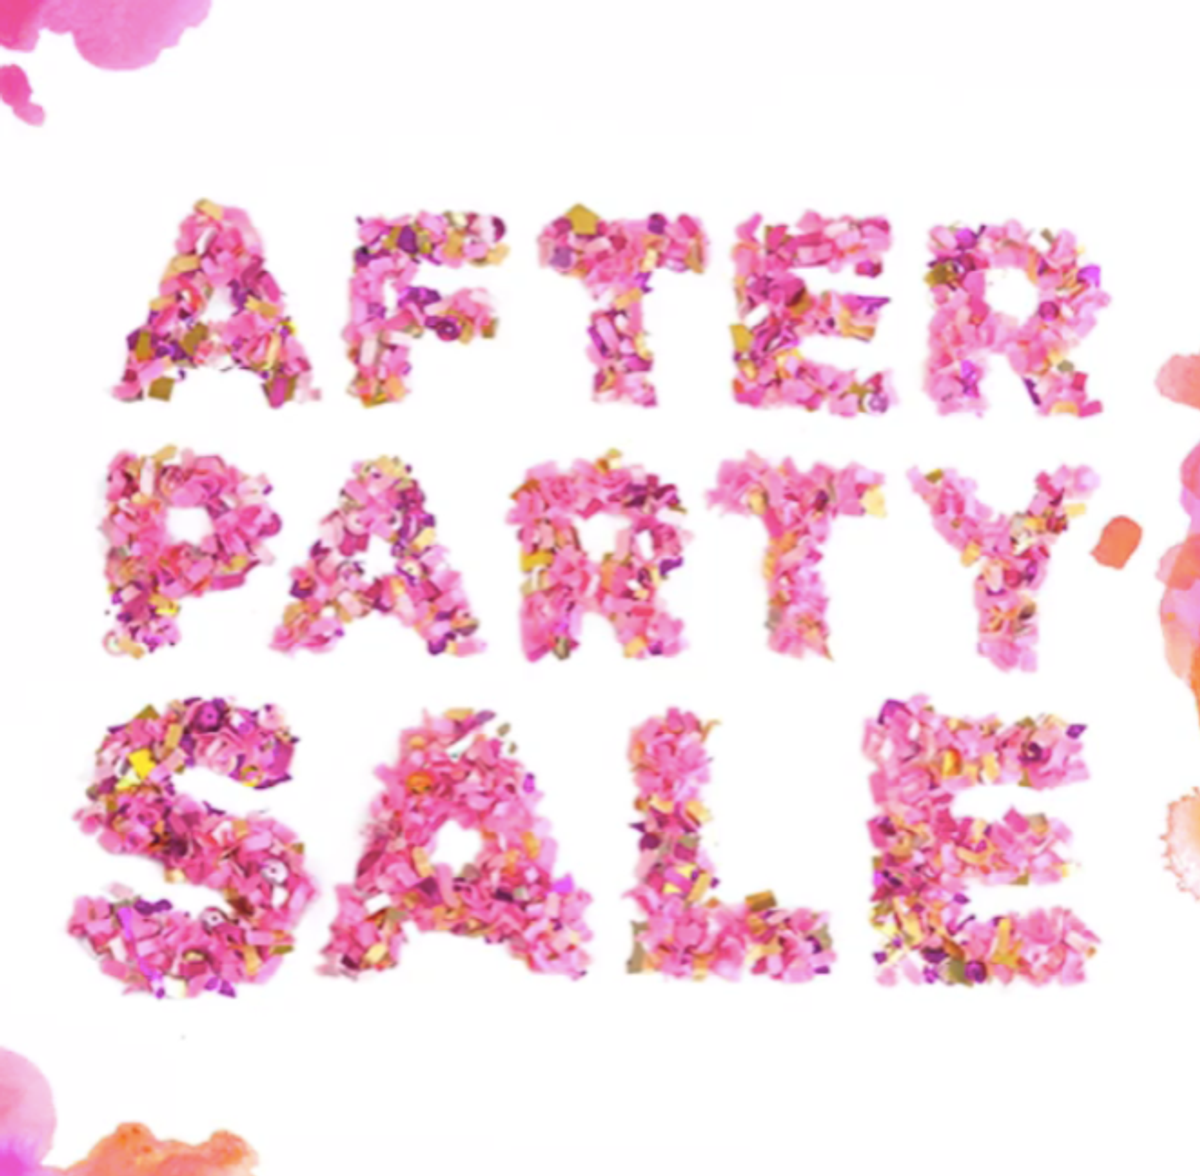 The Best Day Ever Is Among Us: The Lilly After Party Sale